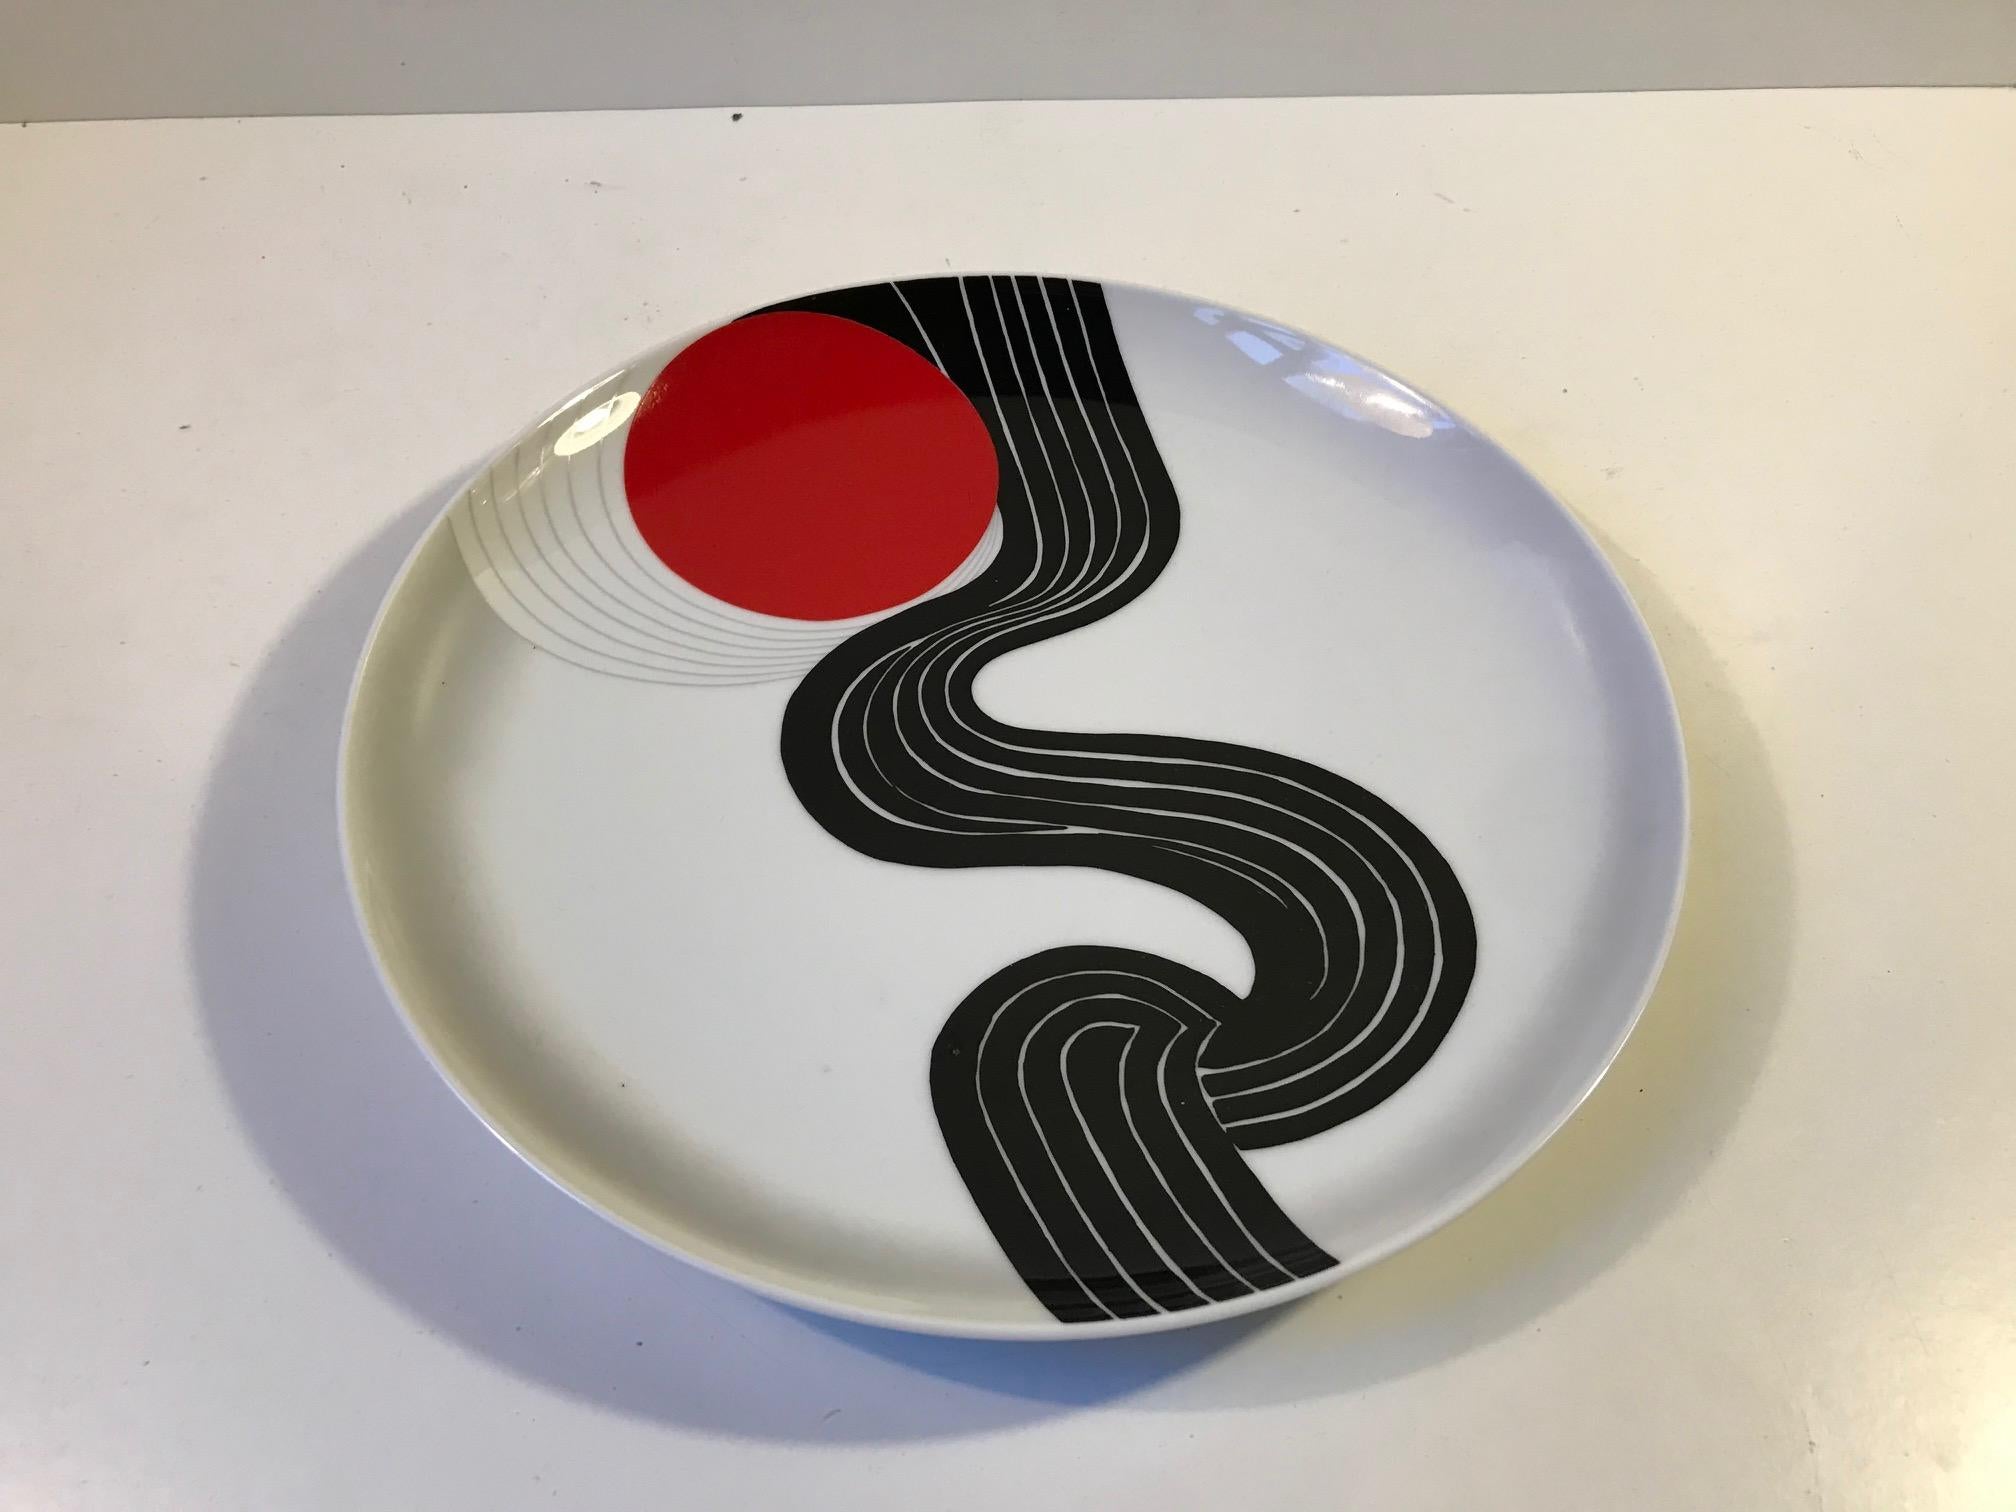 Wall hung porcelain plaque or dish with motif designed by Indian Graphic designer and artist Srivastava Narendra. This plaque is a part of a 600 pieces limited run by German Rosenthal in 1979.